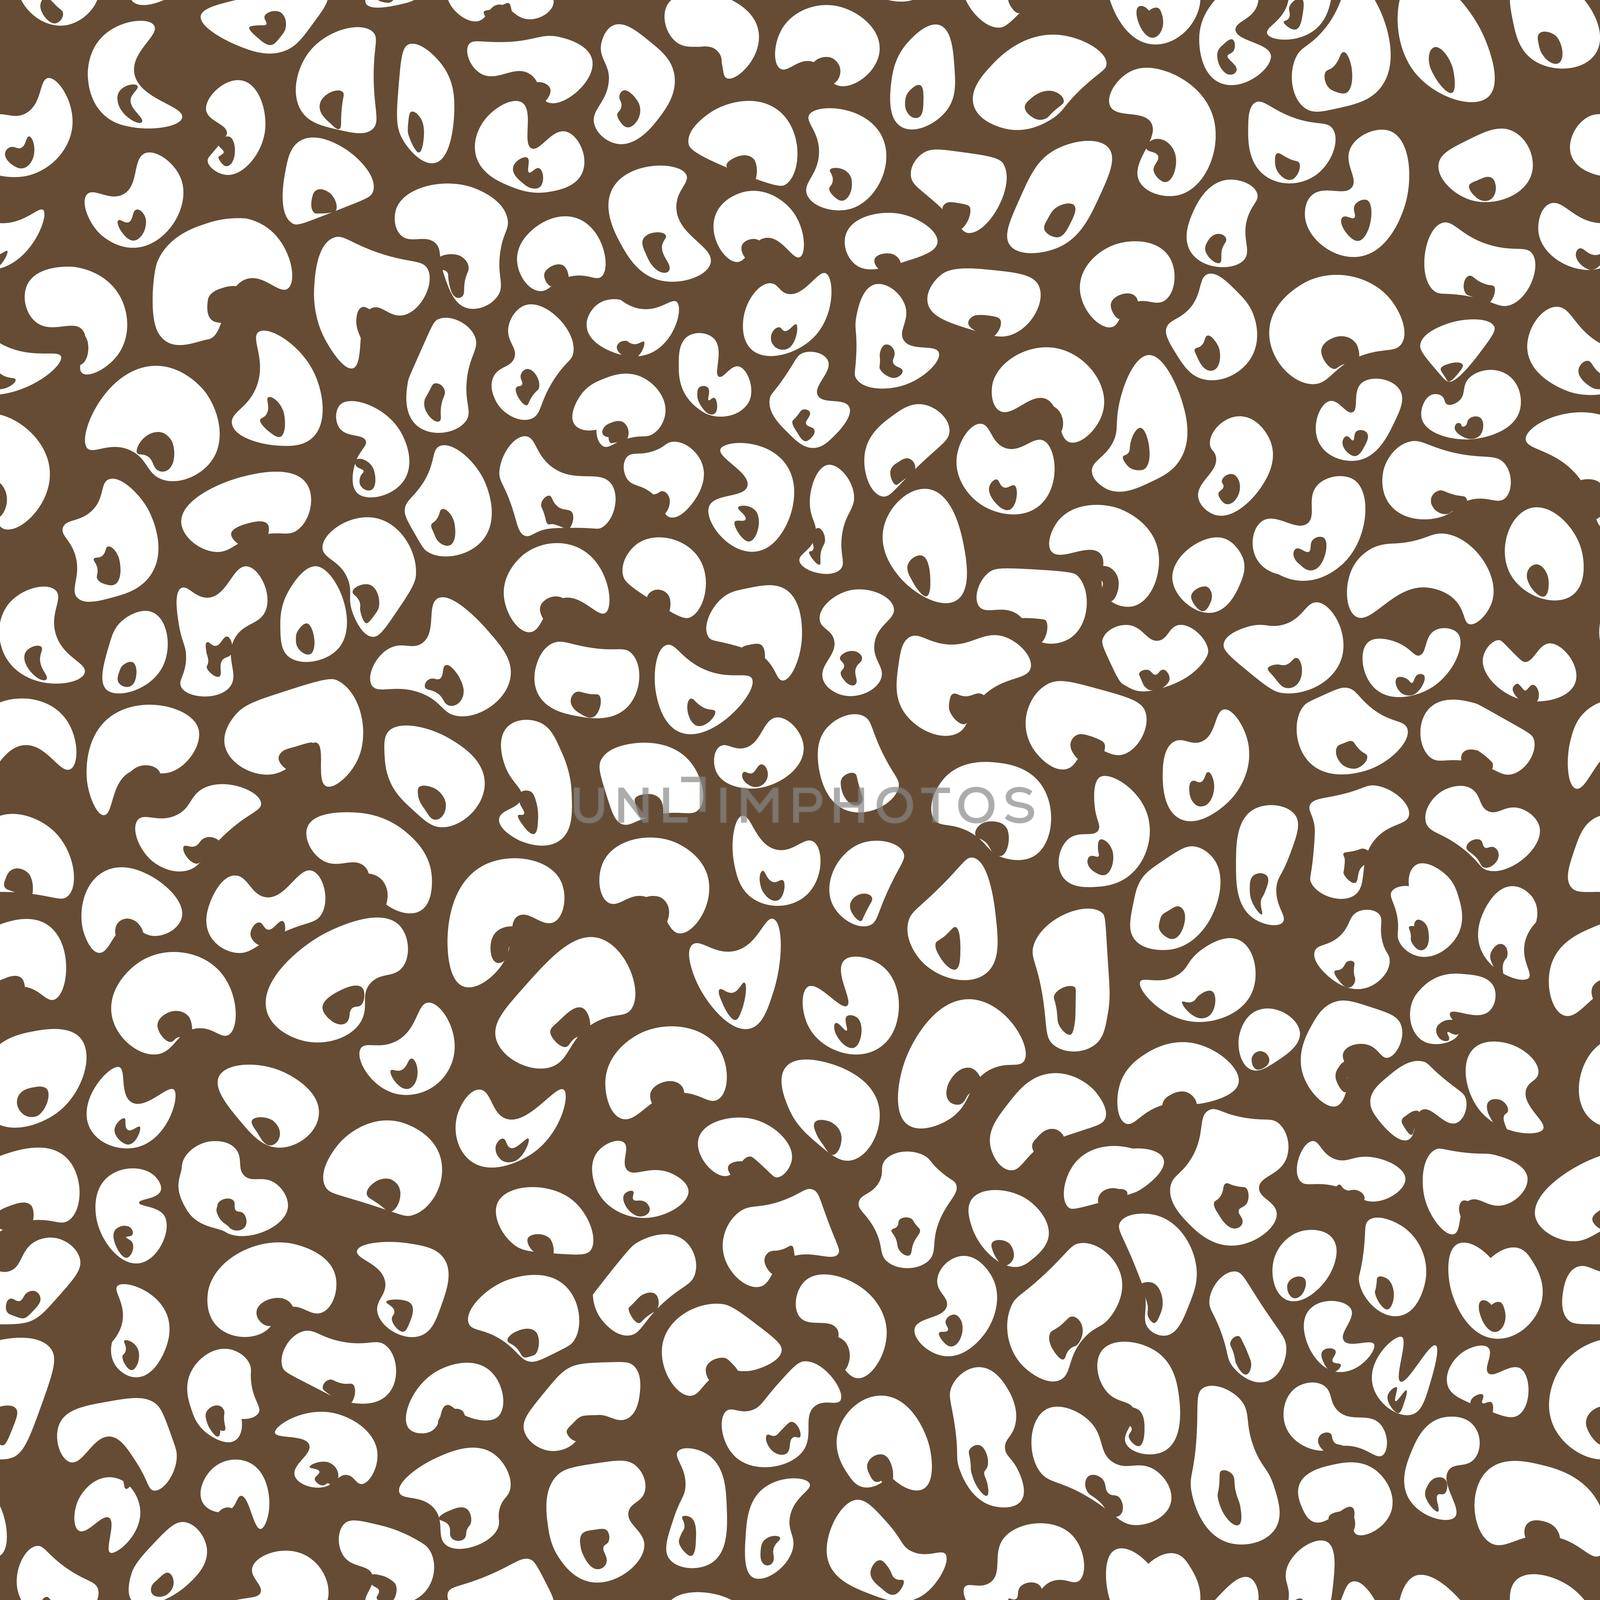 Abstract modern leopard seamless pattern. Animals trendy background. Beige and white decorative vector stock illustration for print, card, postcard, fabric, textile. Modern ornament of stylized skin by allaku